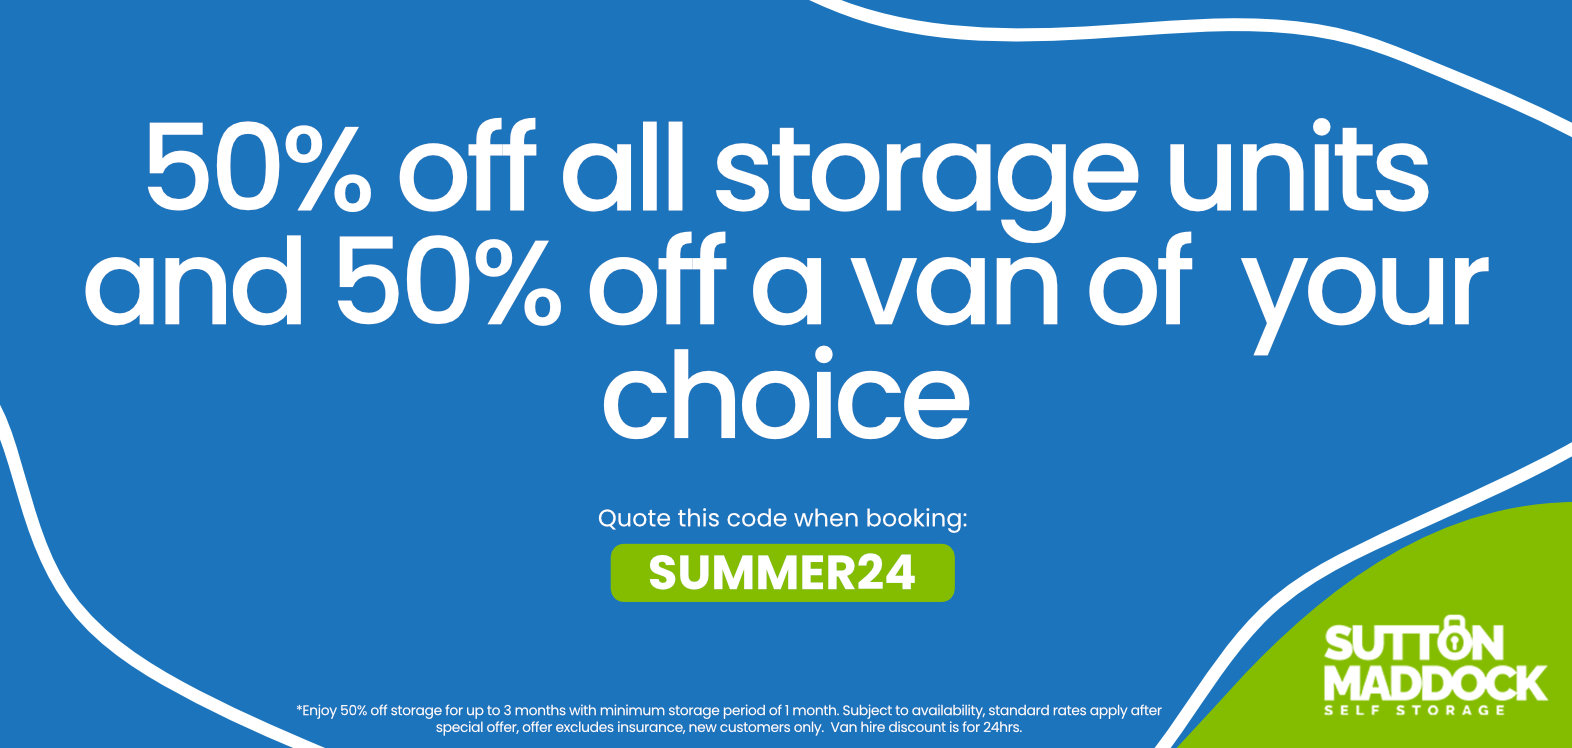 Offer which includes a 50% discount on storage fees and 50% discount on van hire